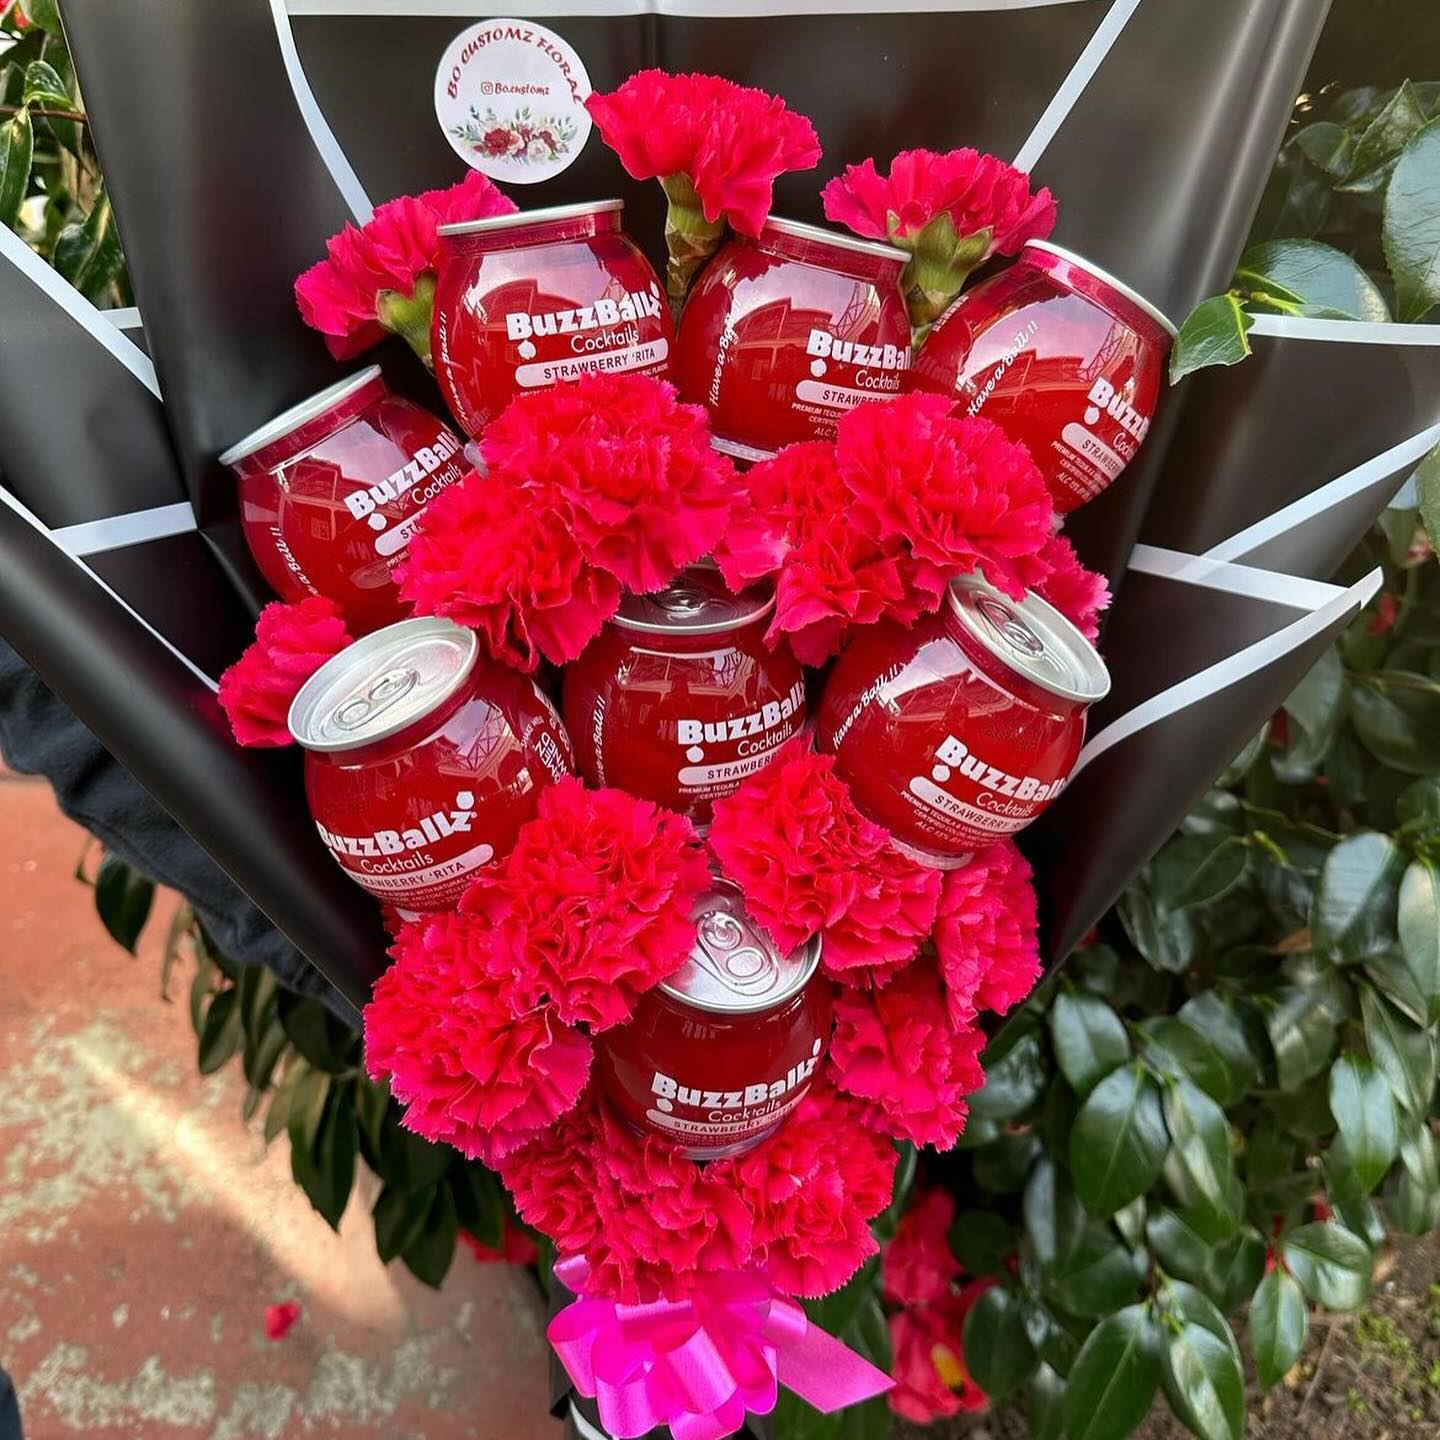 Looking for a last minute gift idea? Everyone loves BuzzBallz & flowers  

Tag us in your boozy bouquets  
@bo.customz 
@marlenesflowers 
@blossomingiriss 
@petalsbyjazmine